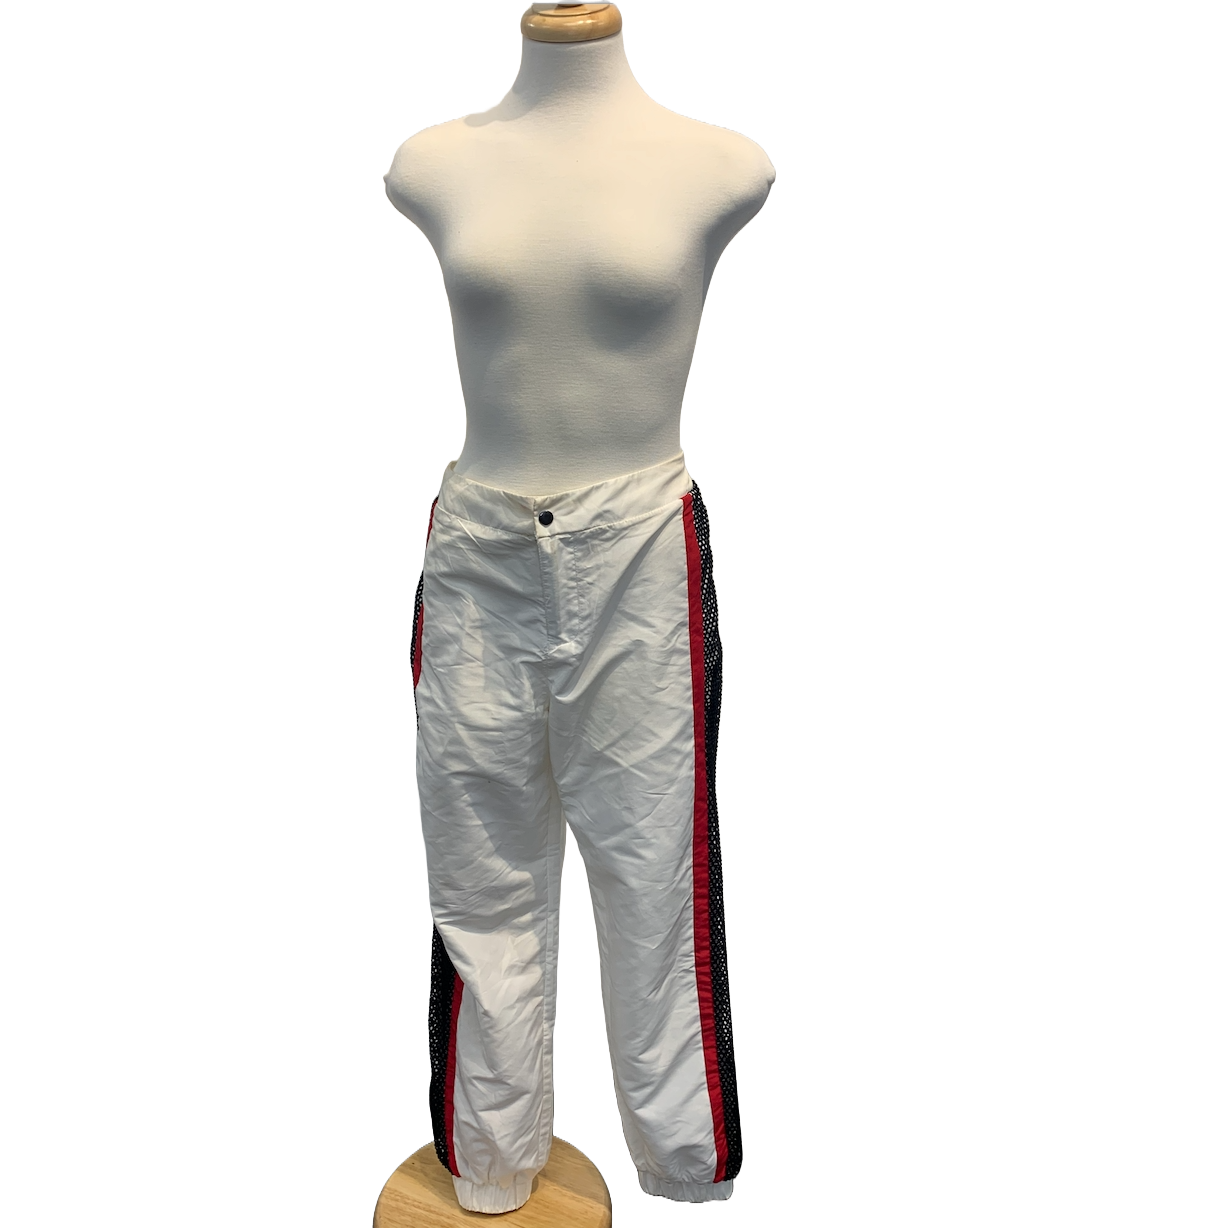 White pants with red and black stripe